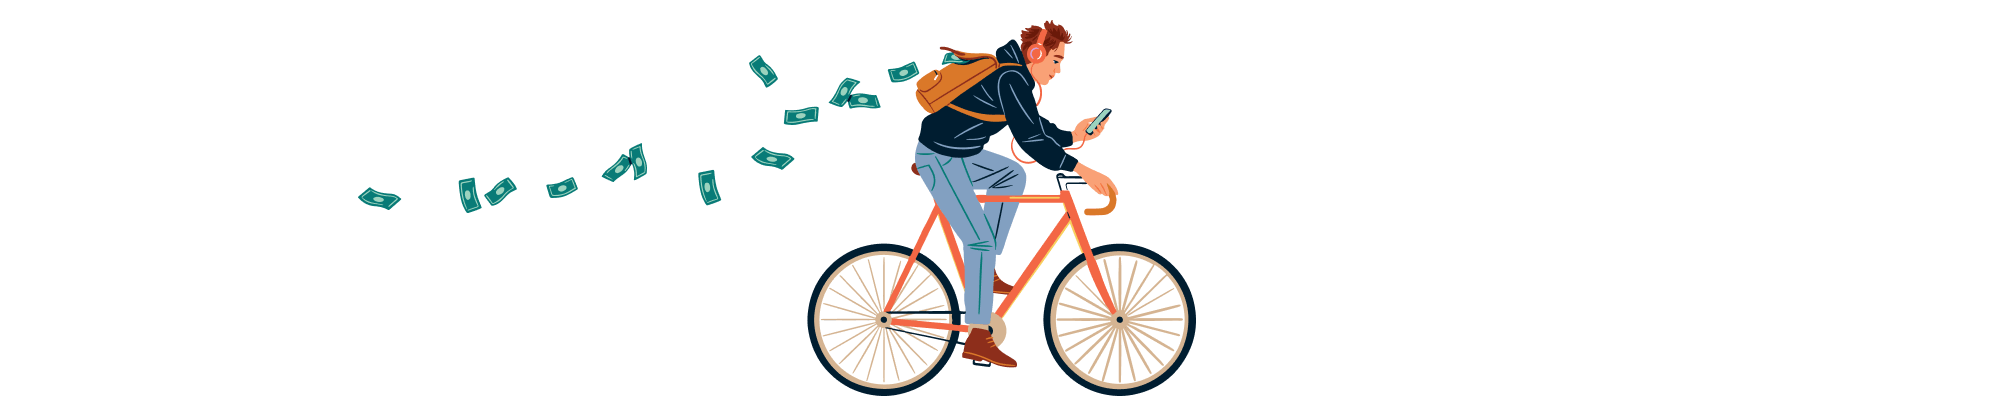 Illustration of man riding a bicycle while reading his phone while money flies out of his backpack.